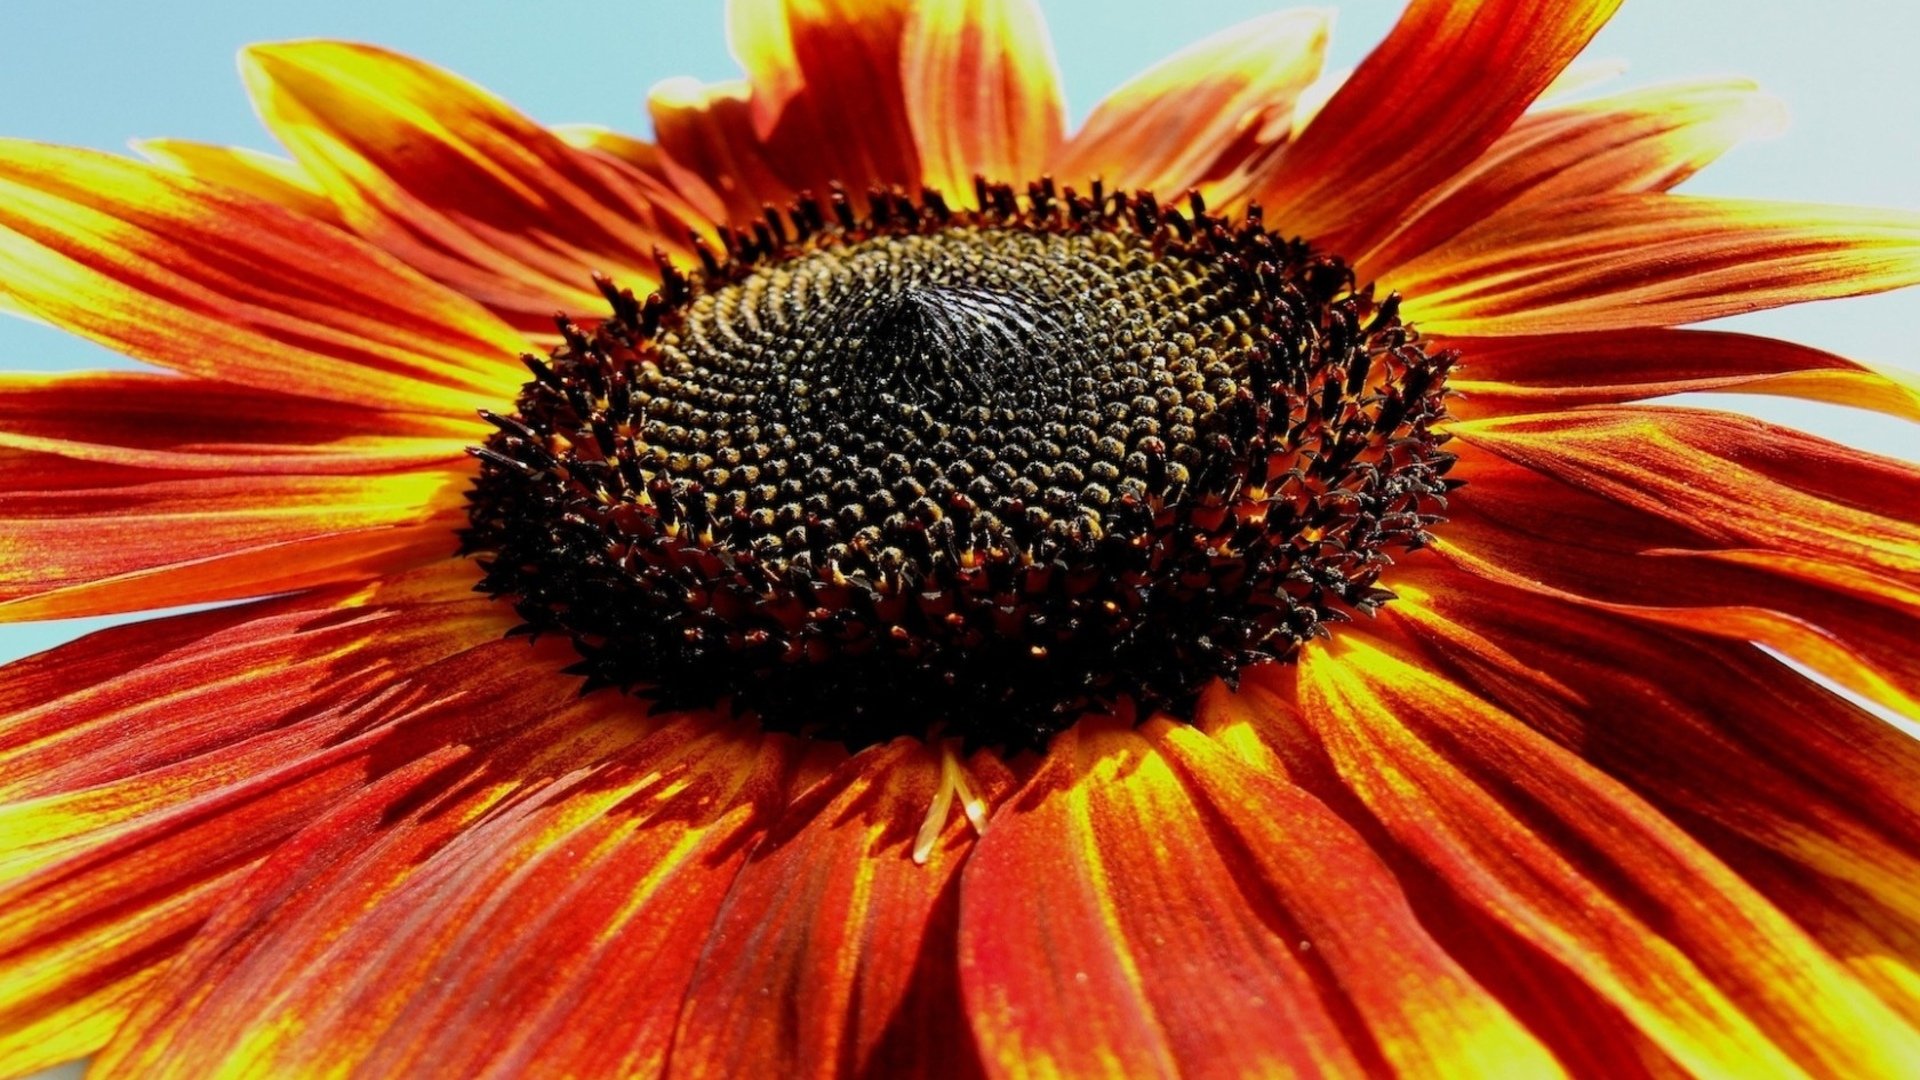 Download full hd 1080p Sunflower PC background ID:226431 for free